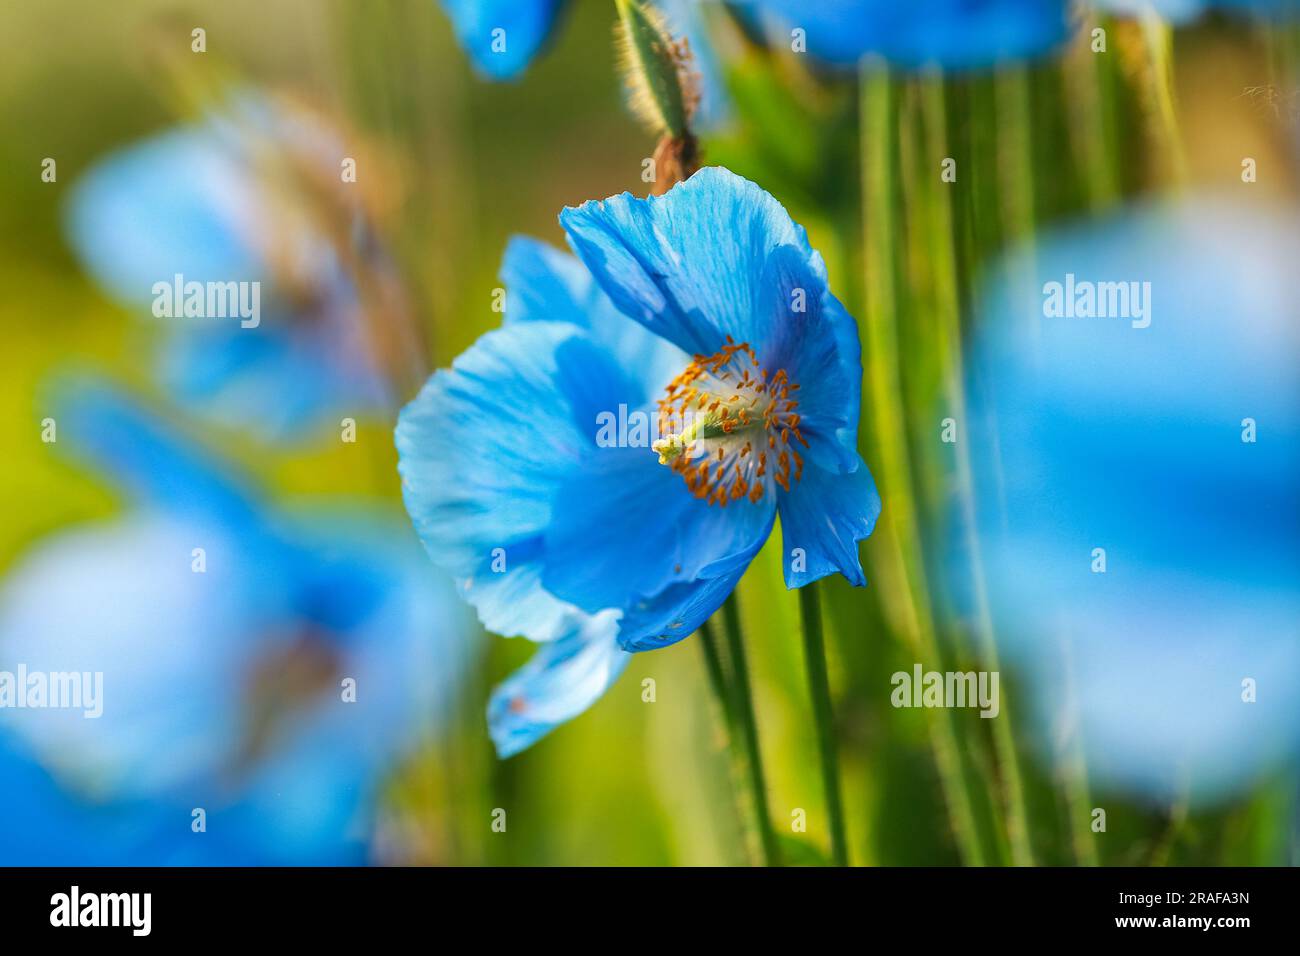 Blooming plant Meconopsis Grandis on the green background Stock Photo